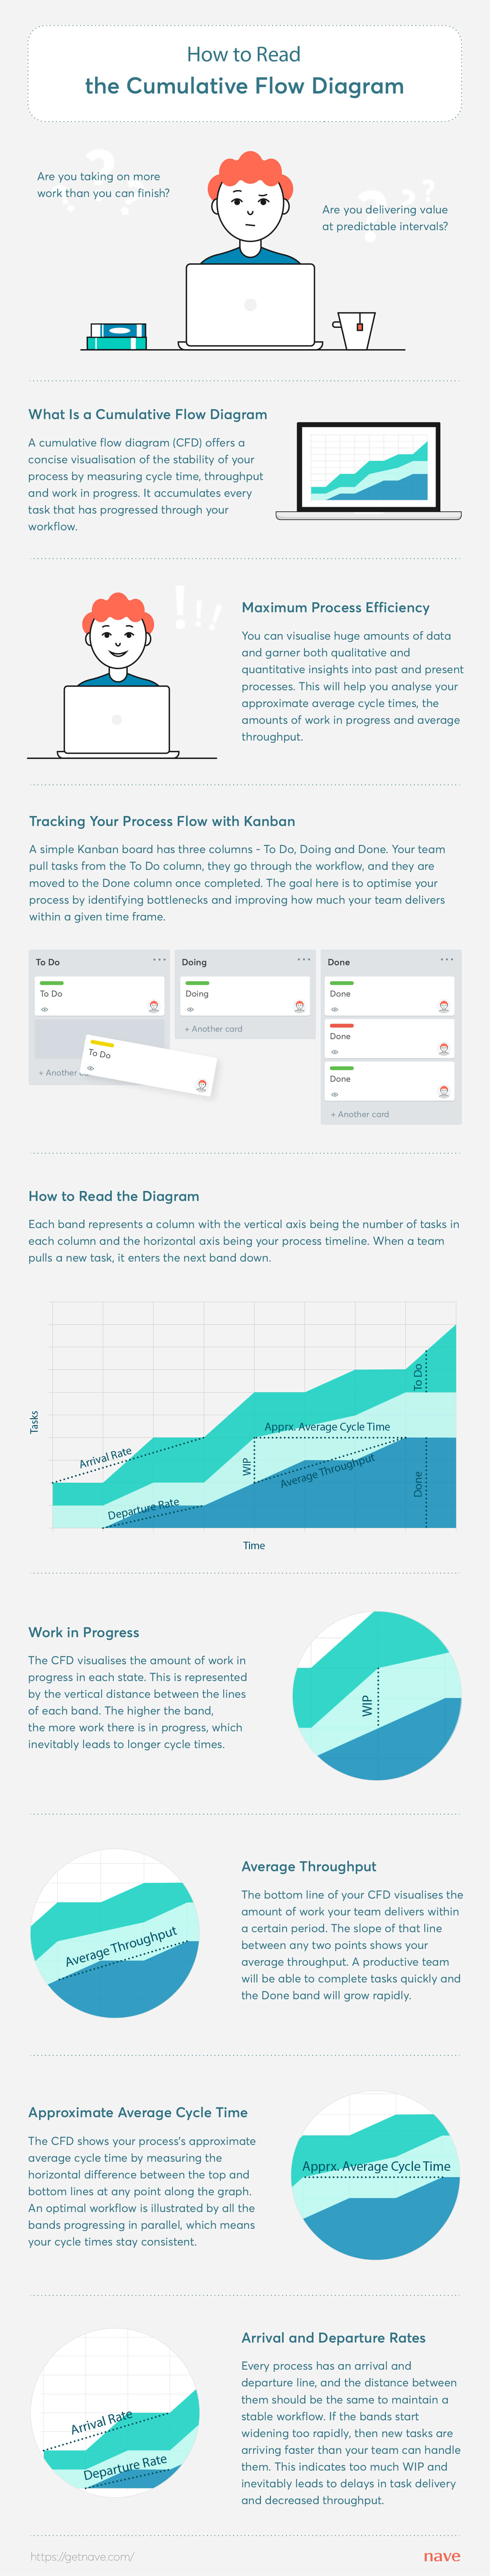 How to read the Cumulative Flow Diagram (Infographic)